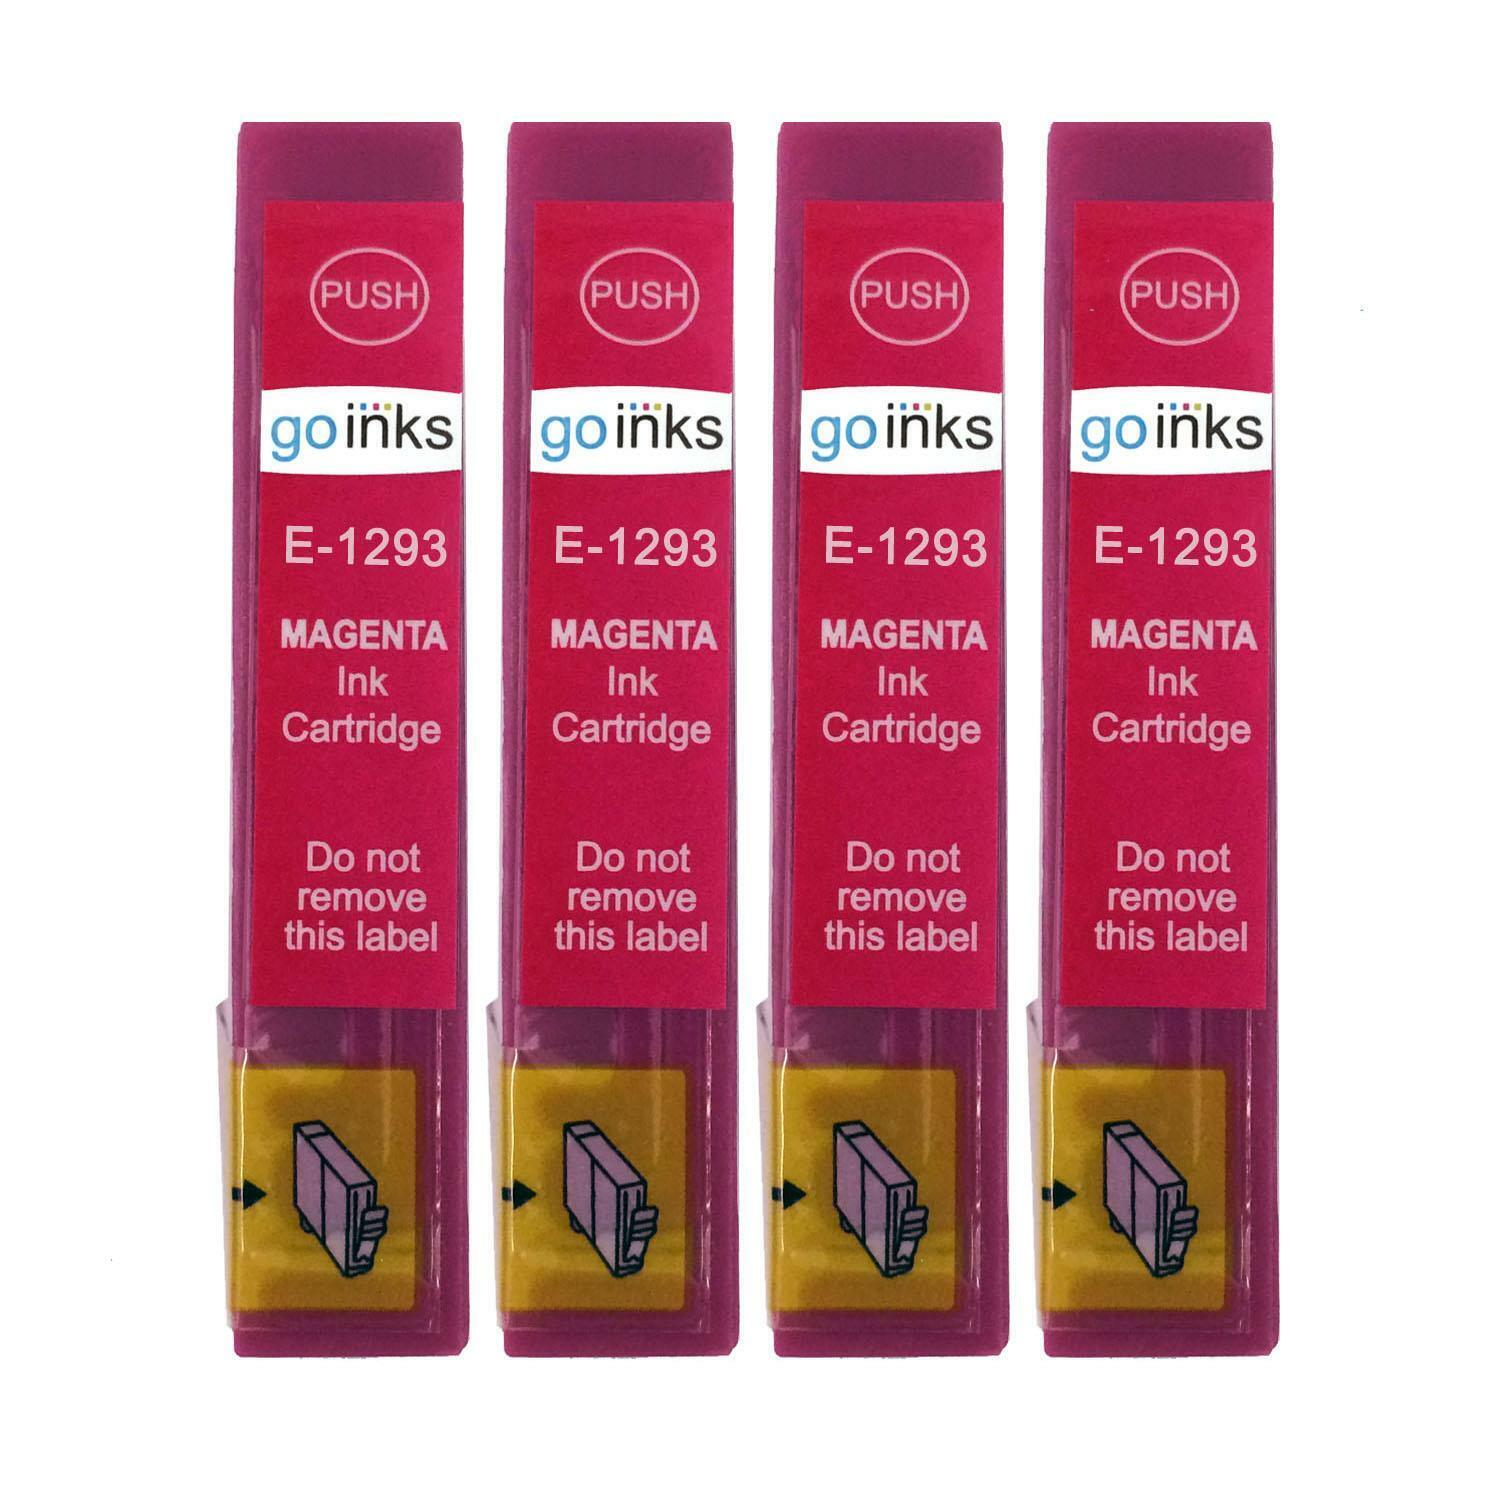 4 Magenta Ink Cartridges non-OEM to replace T1293 (Apple) Compatible for Printer